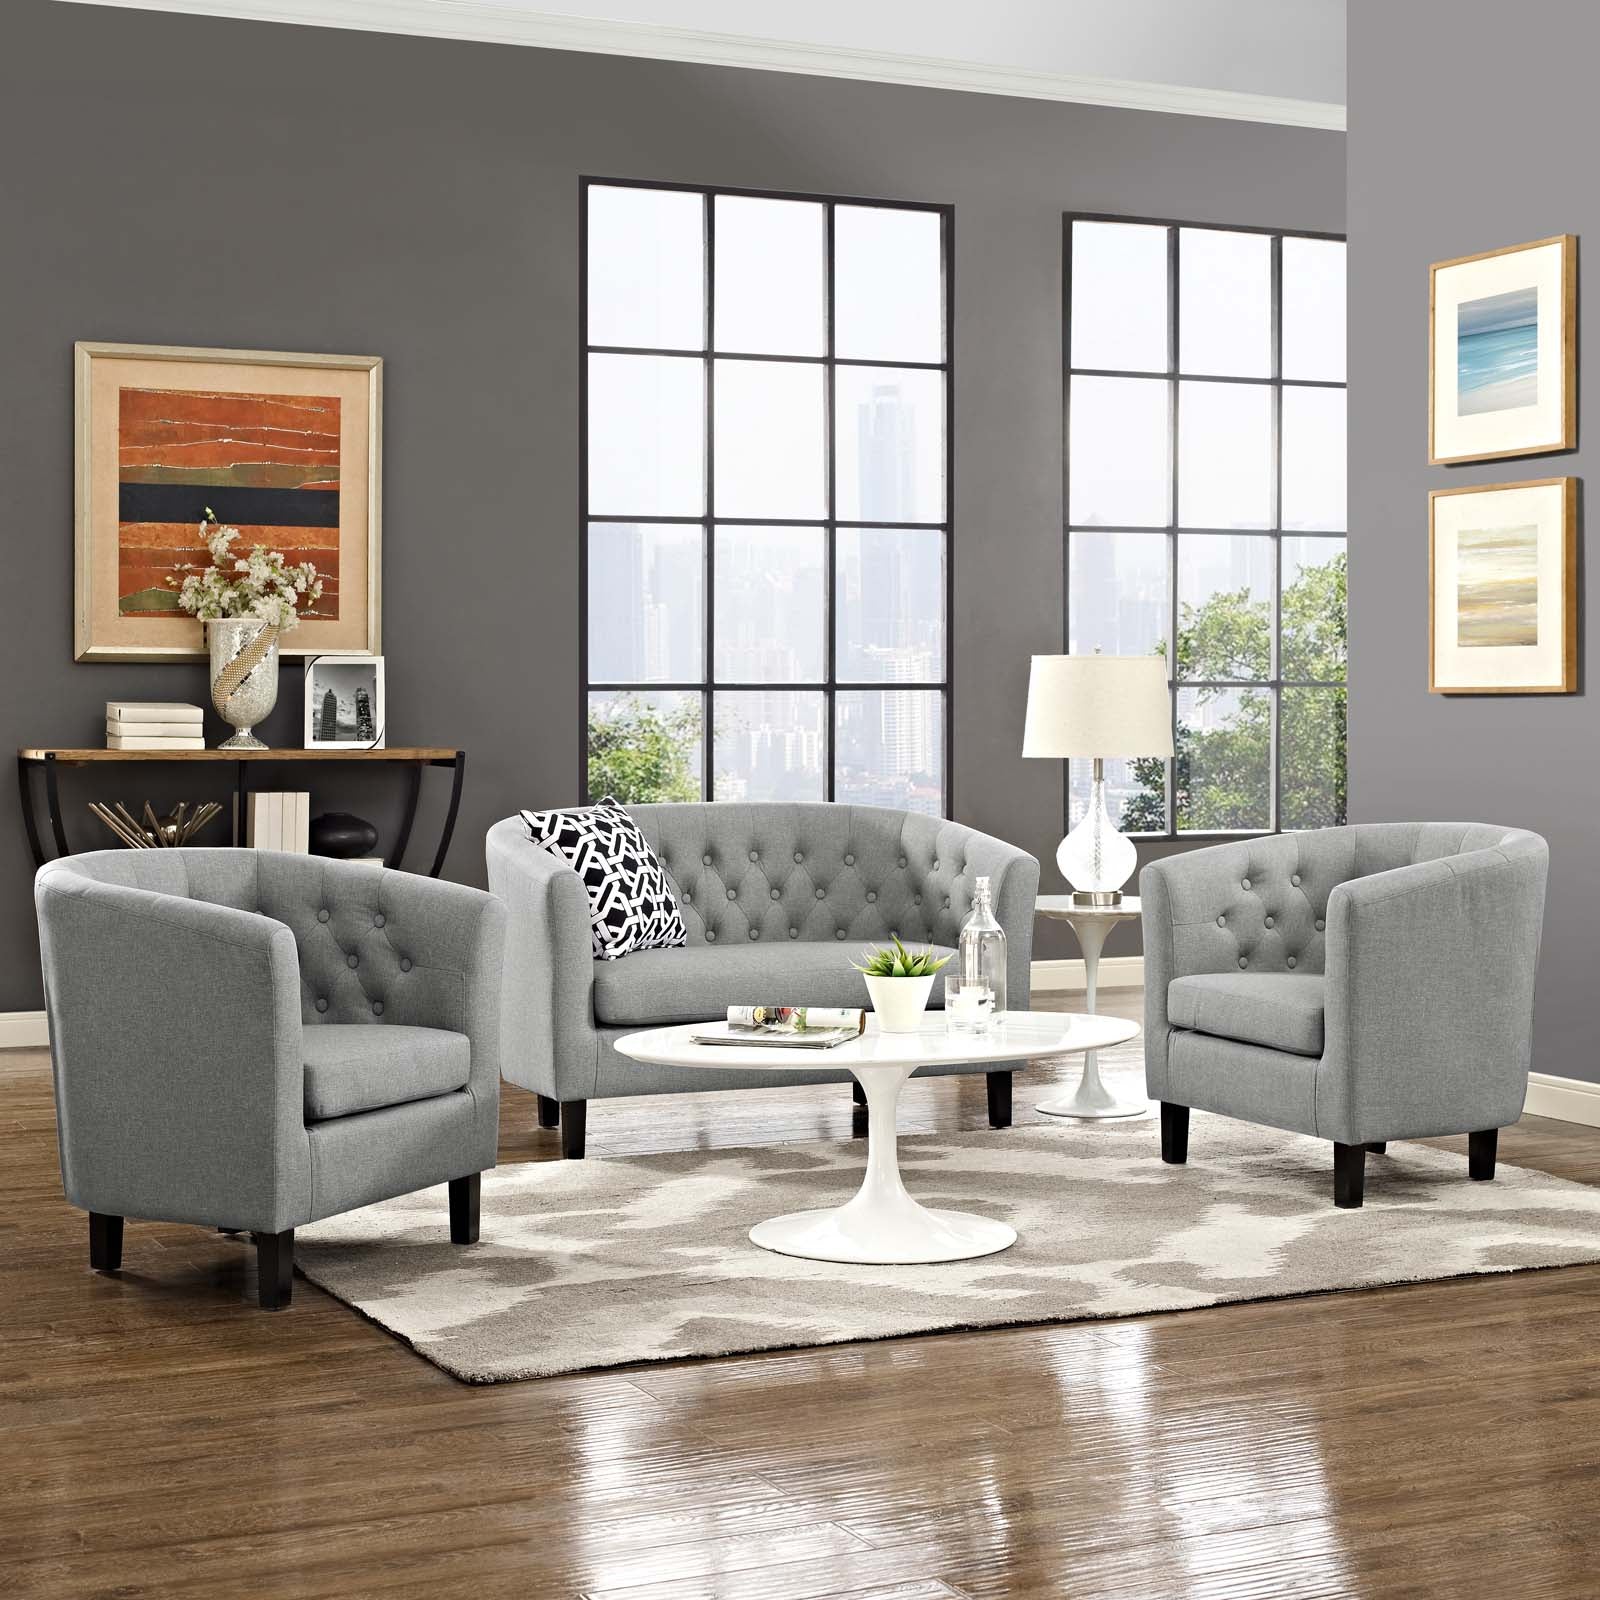 Prospect 3 Piece Upholstered Fabric Loveseat and Armchair Set - East Shore Modern Home Furnishings